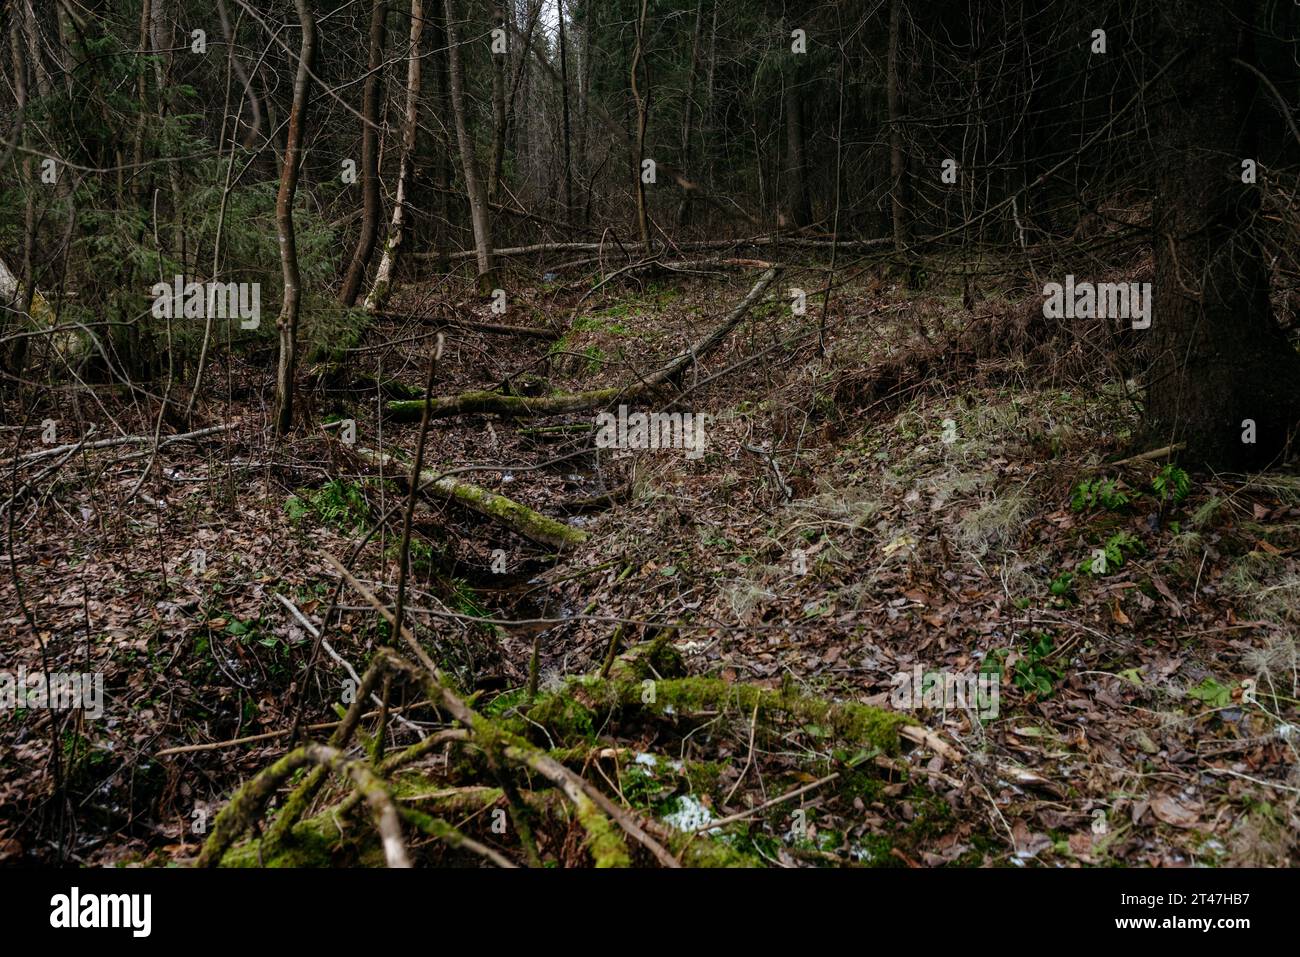 Late autumn in the northern forest. Landscape. A forest creek in a ravine, littered with dry tree trunks. Stock Photo